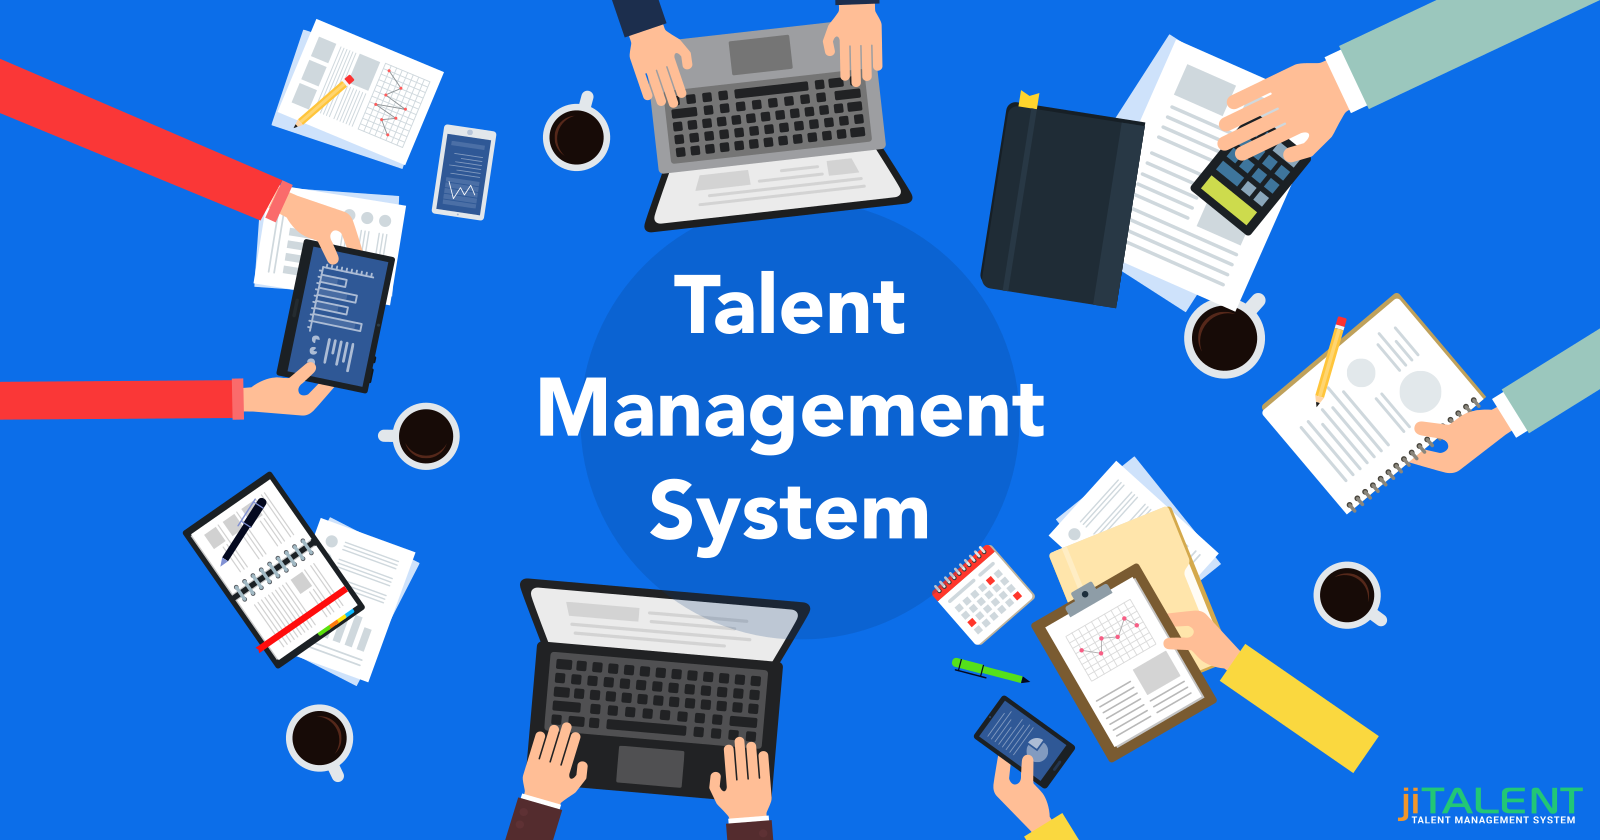 Make Your HR Team Perform Better Using a Talent Management System